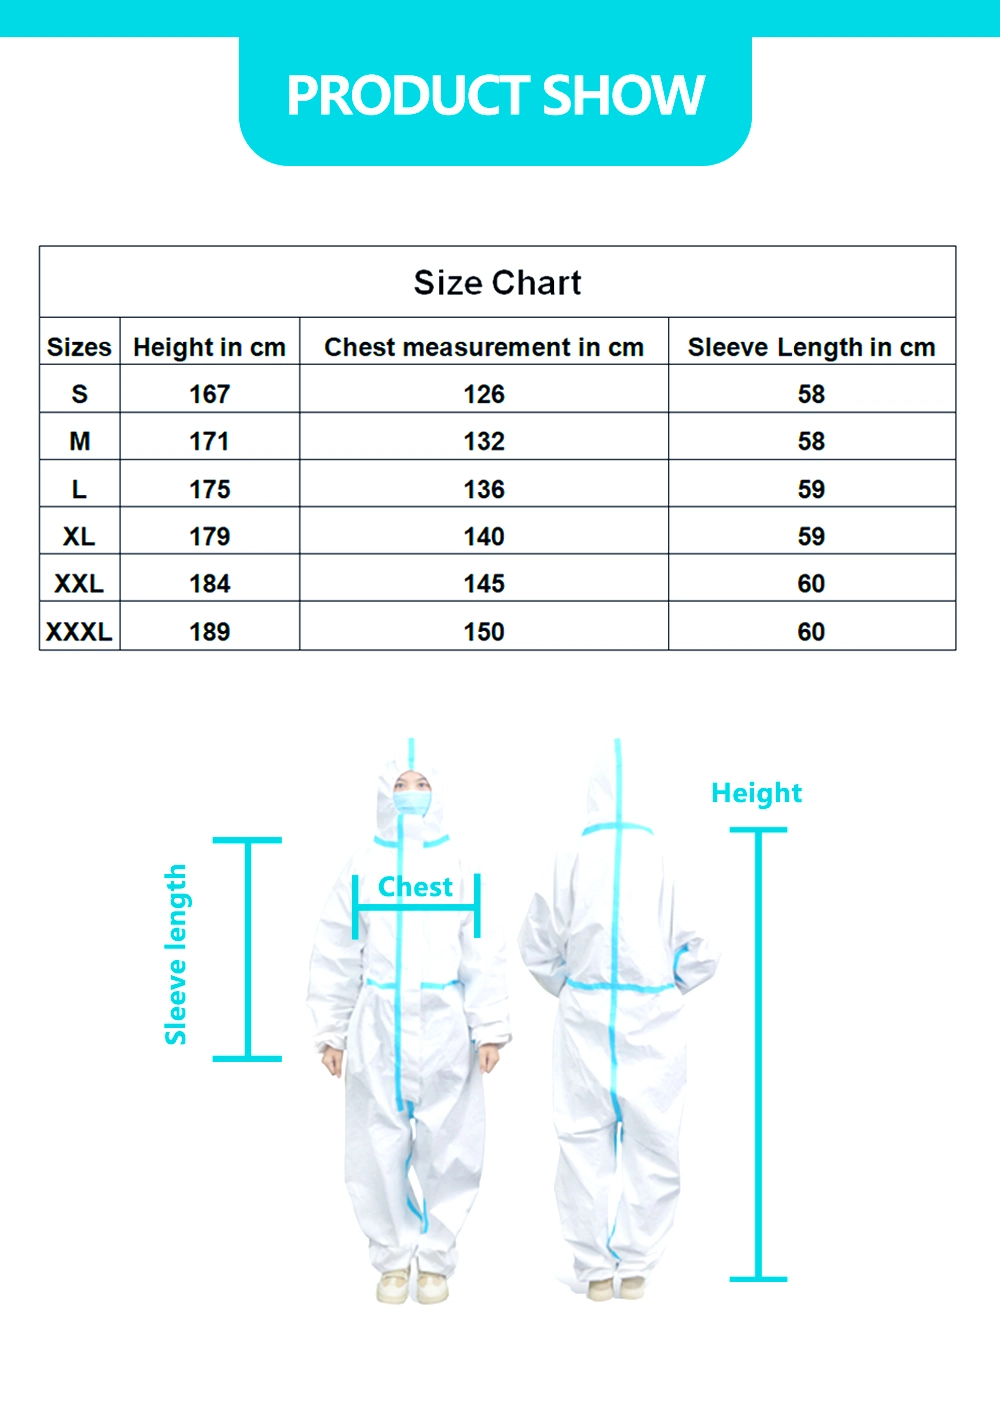 PP+PE Protective Coverall White and Blue Medical Protective Coverall